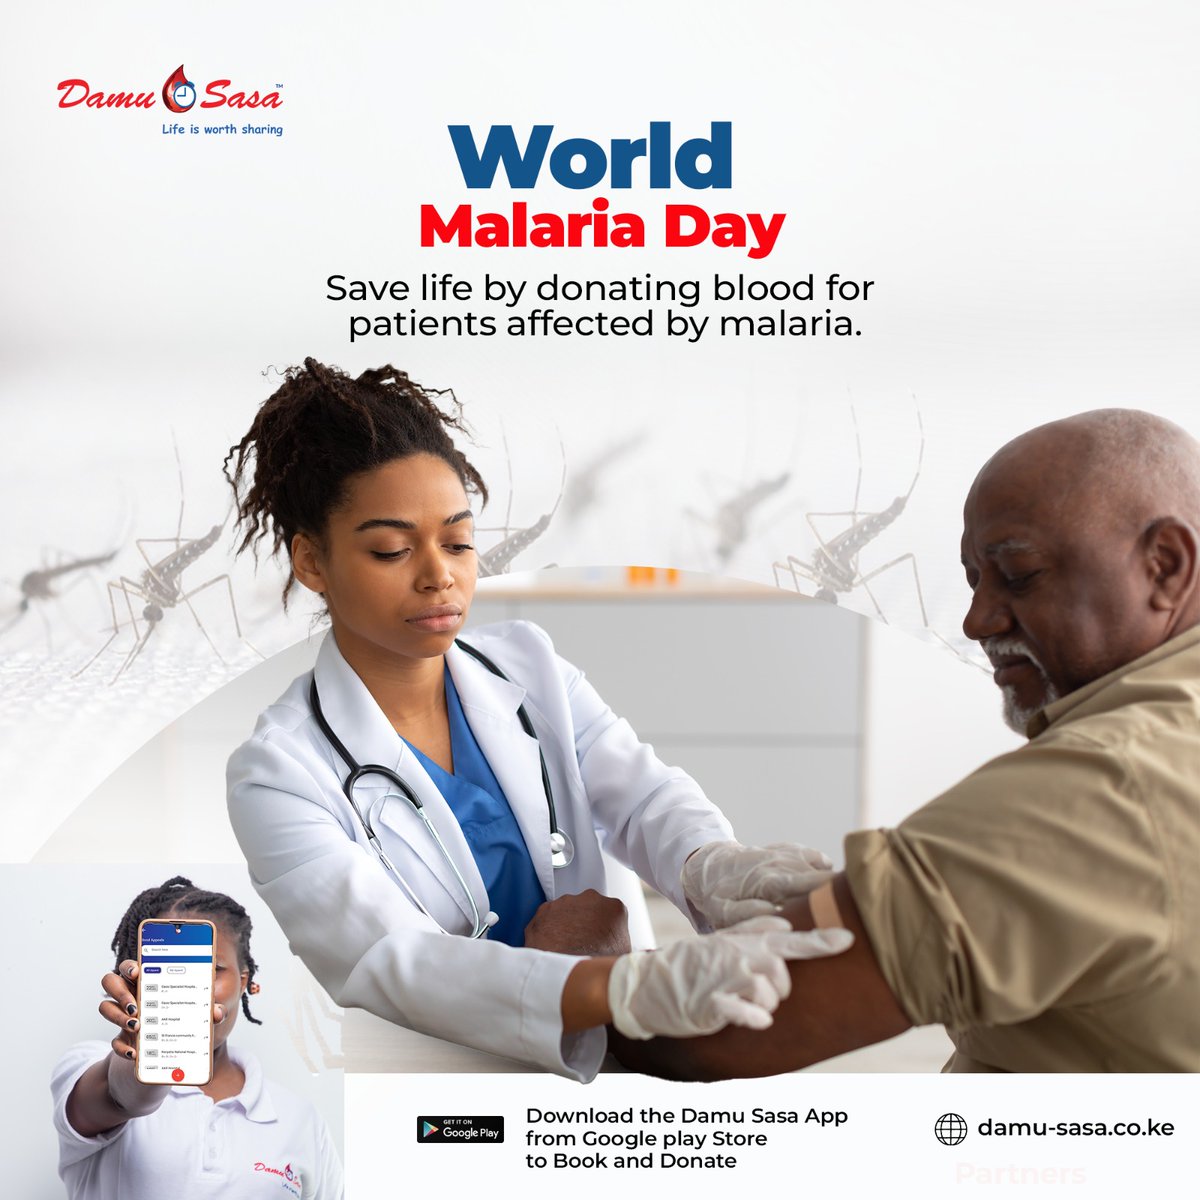 One of the most severe complications of malaria is severe malaria anemia. In severe malaria cases, the Plasmodium parasites... To learn more use the link below: damu-sasa.co.ke/health-reviews… #WorldMalariaDay #RoleofBloodDonationinMalaria